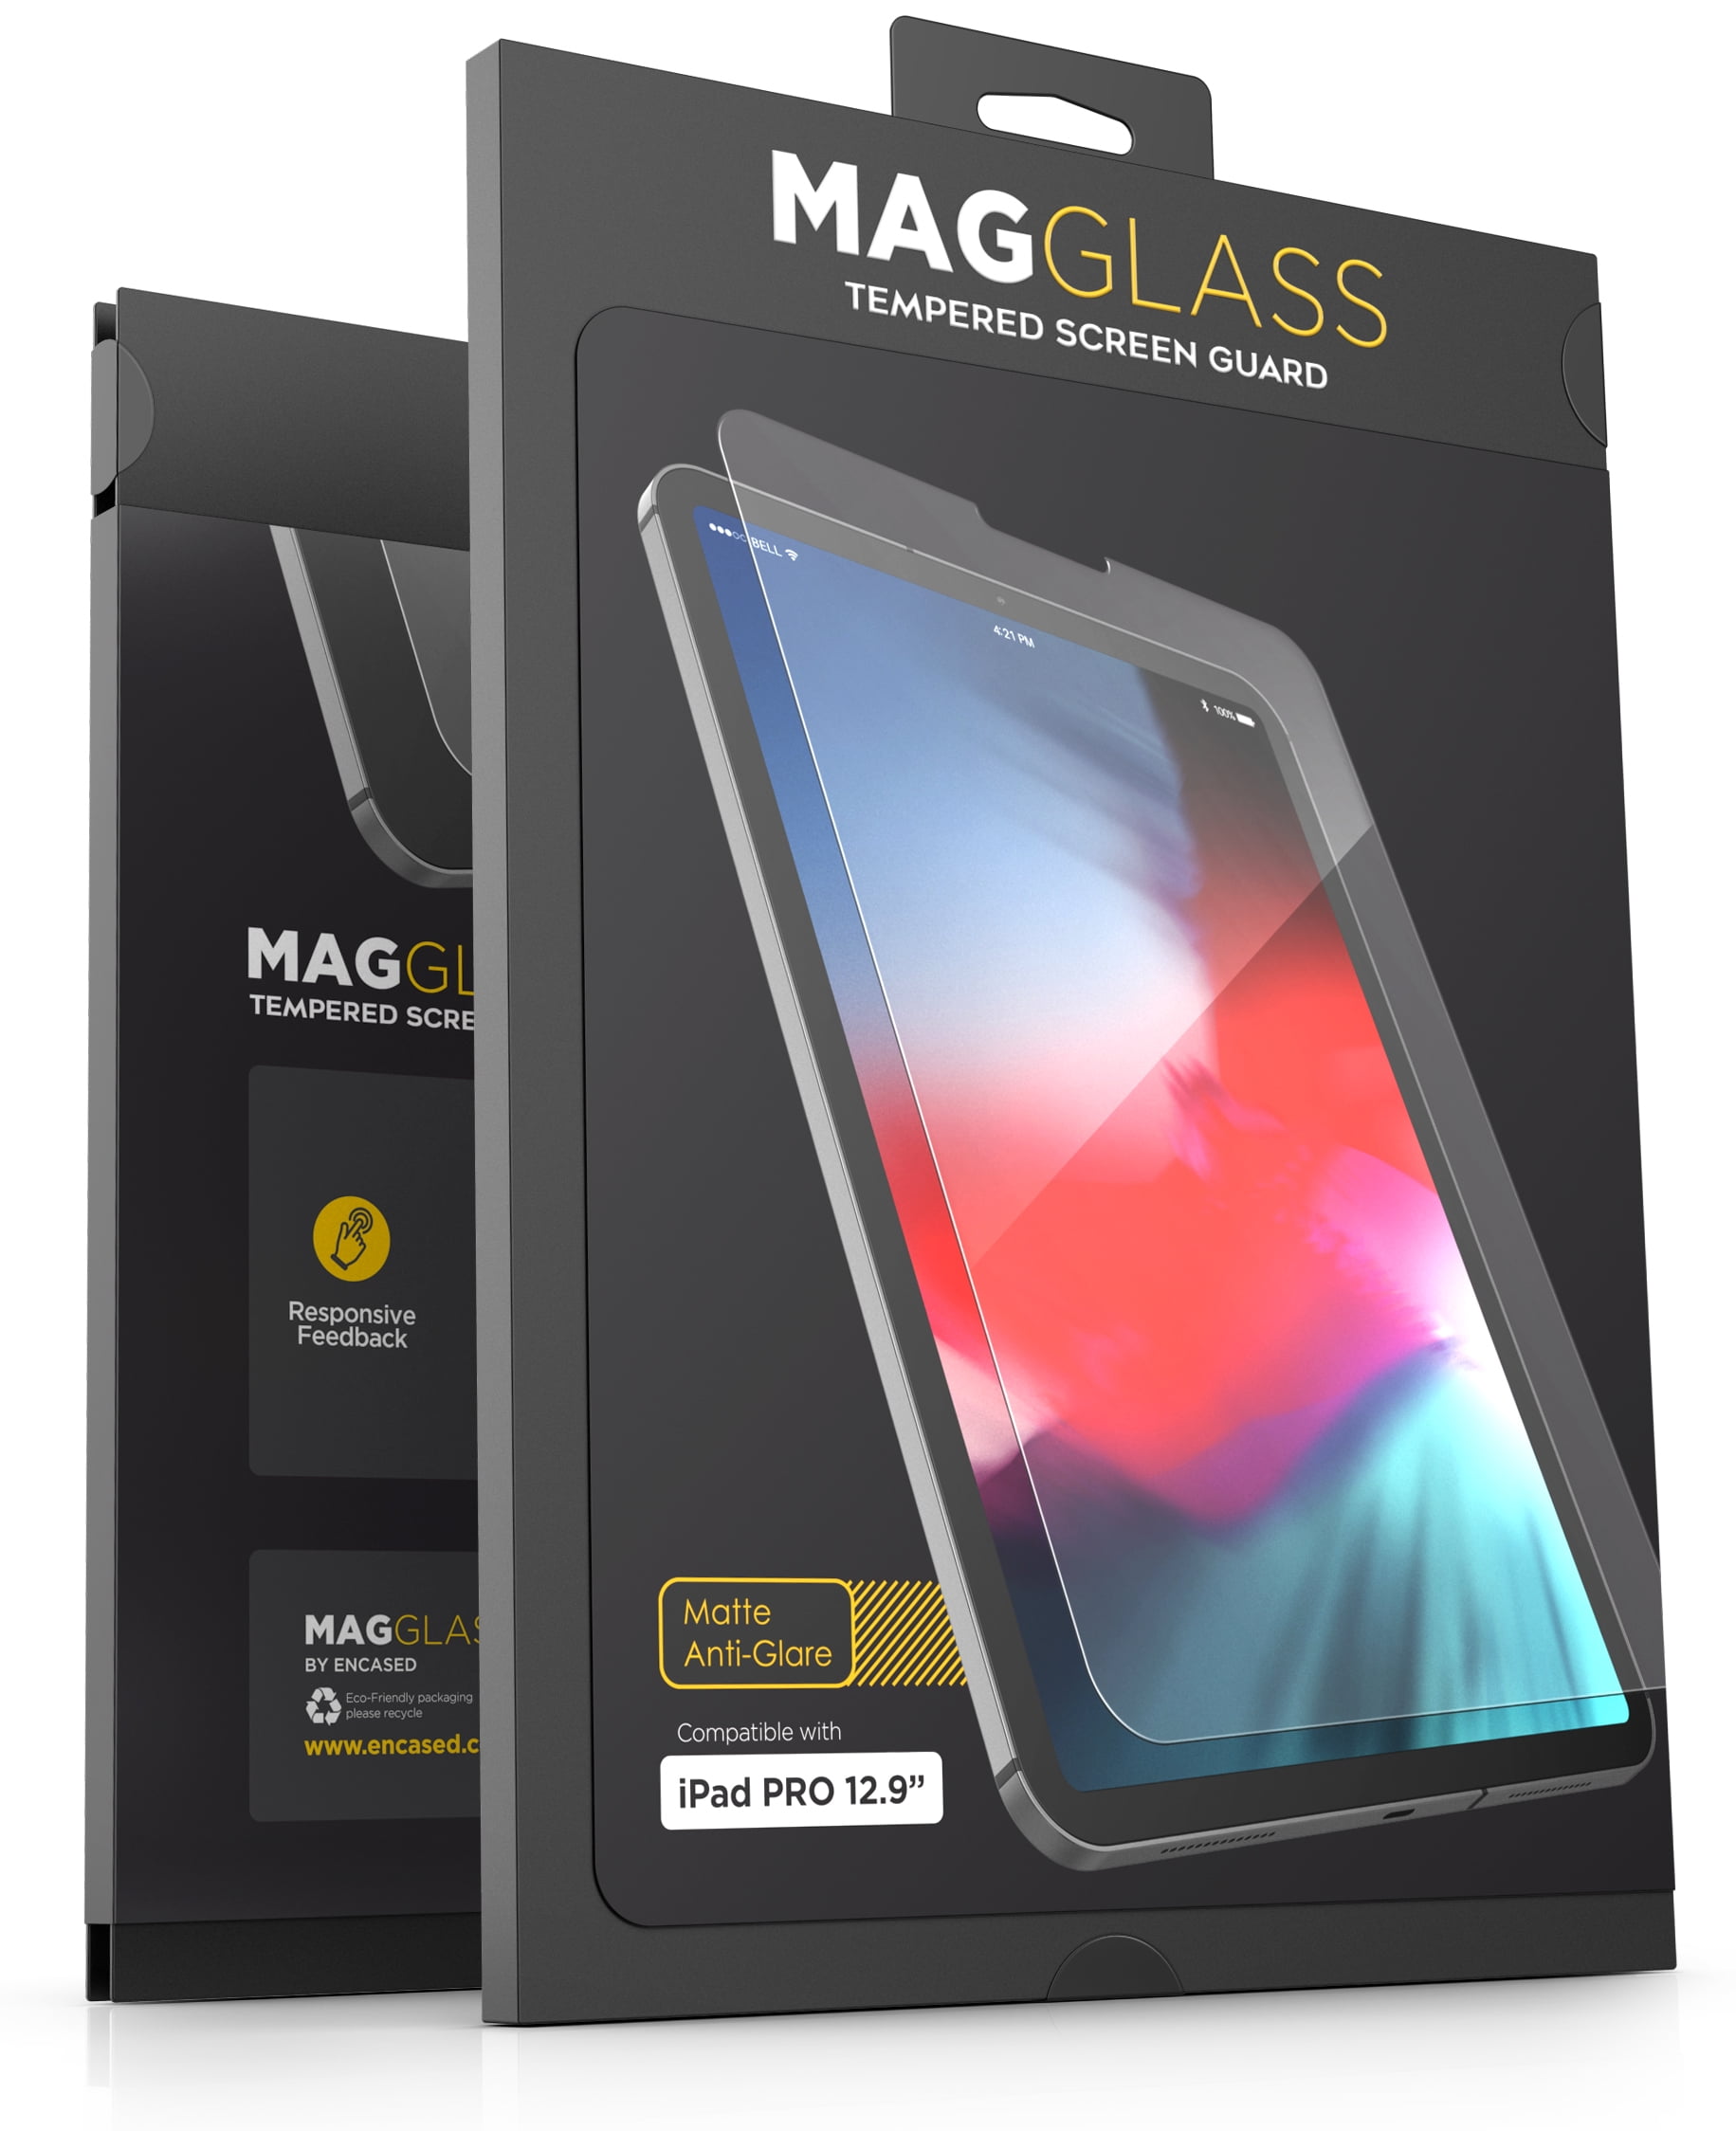 3-Pack Dmax Armor Anti-Glare Matte Screen Protector for iPad Pro 12.9" 2015-2017 